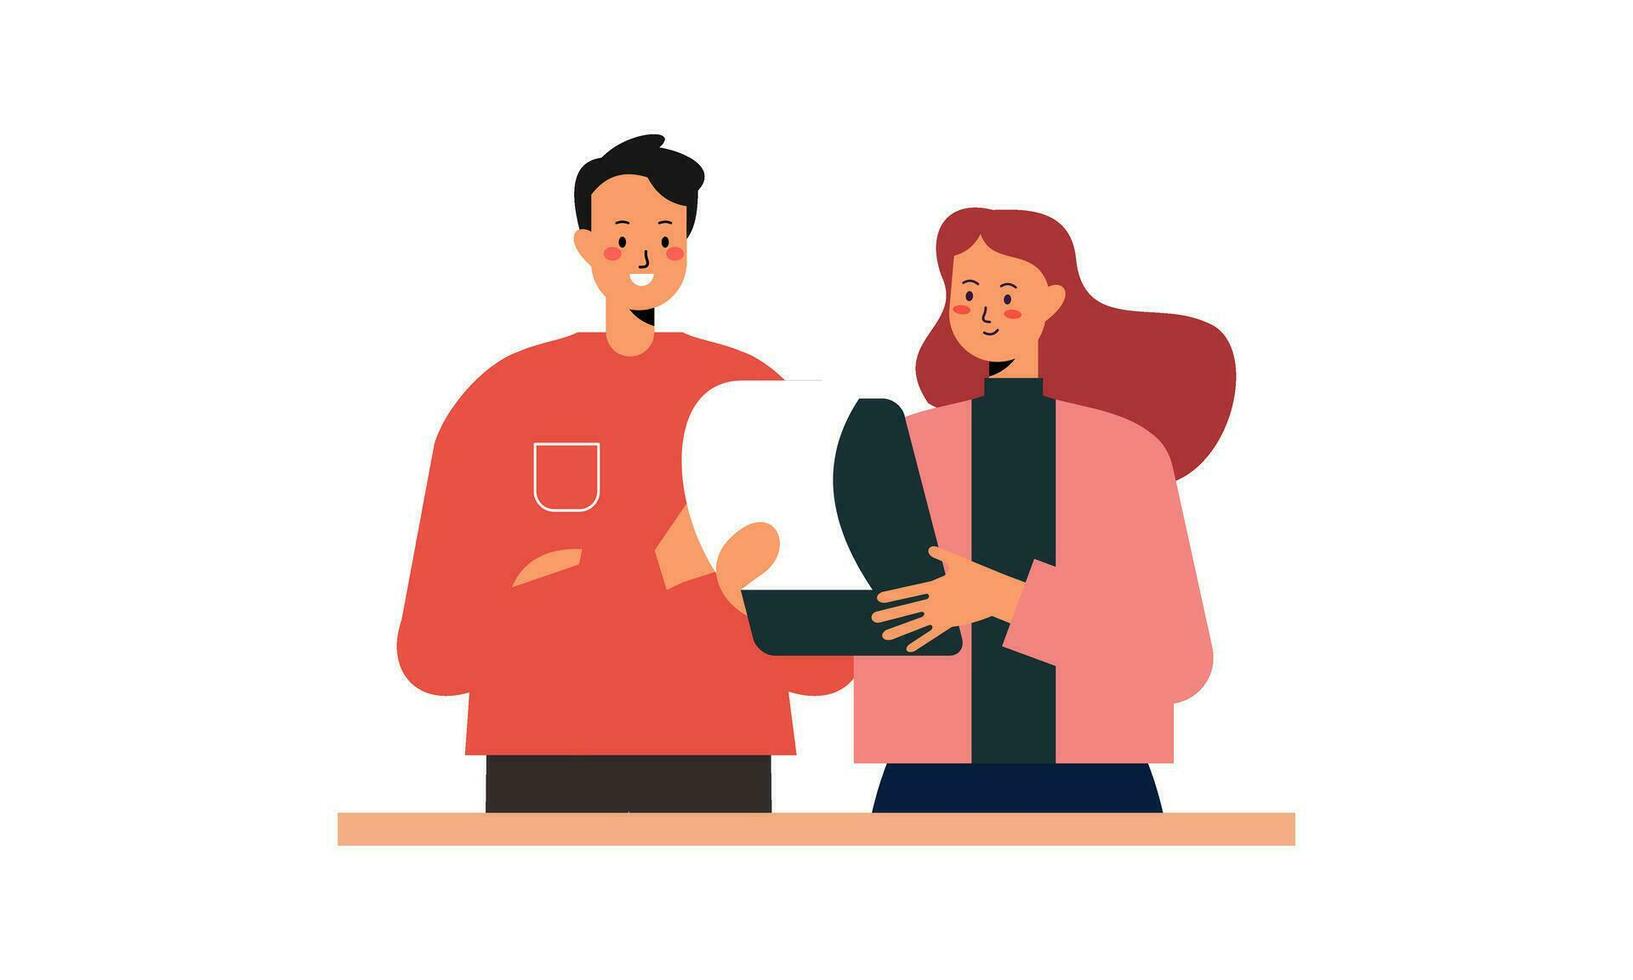 Office Worker Having Discussion with Colleague. Business Discussion Concept Flat Design Illustration vector